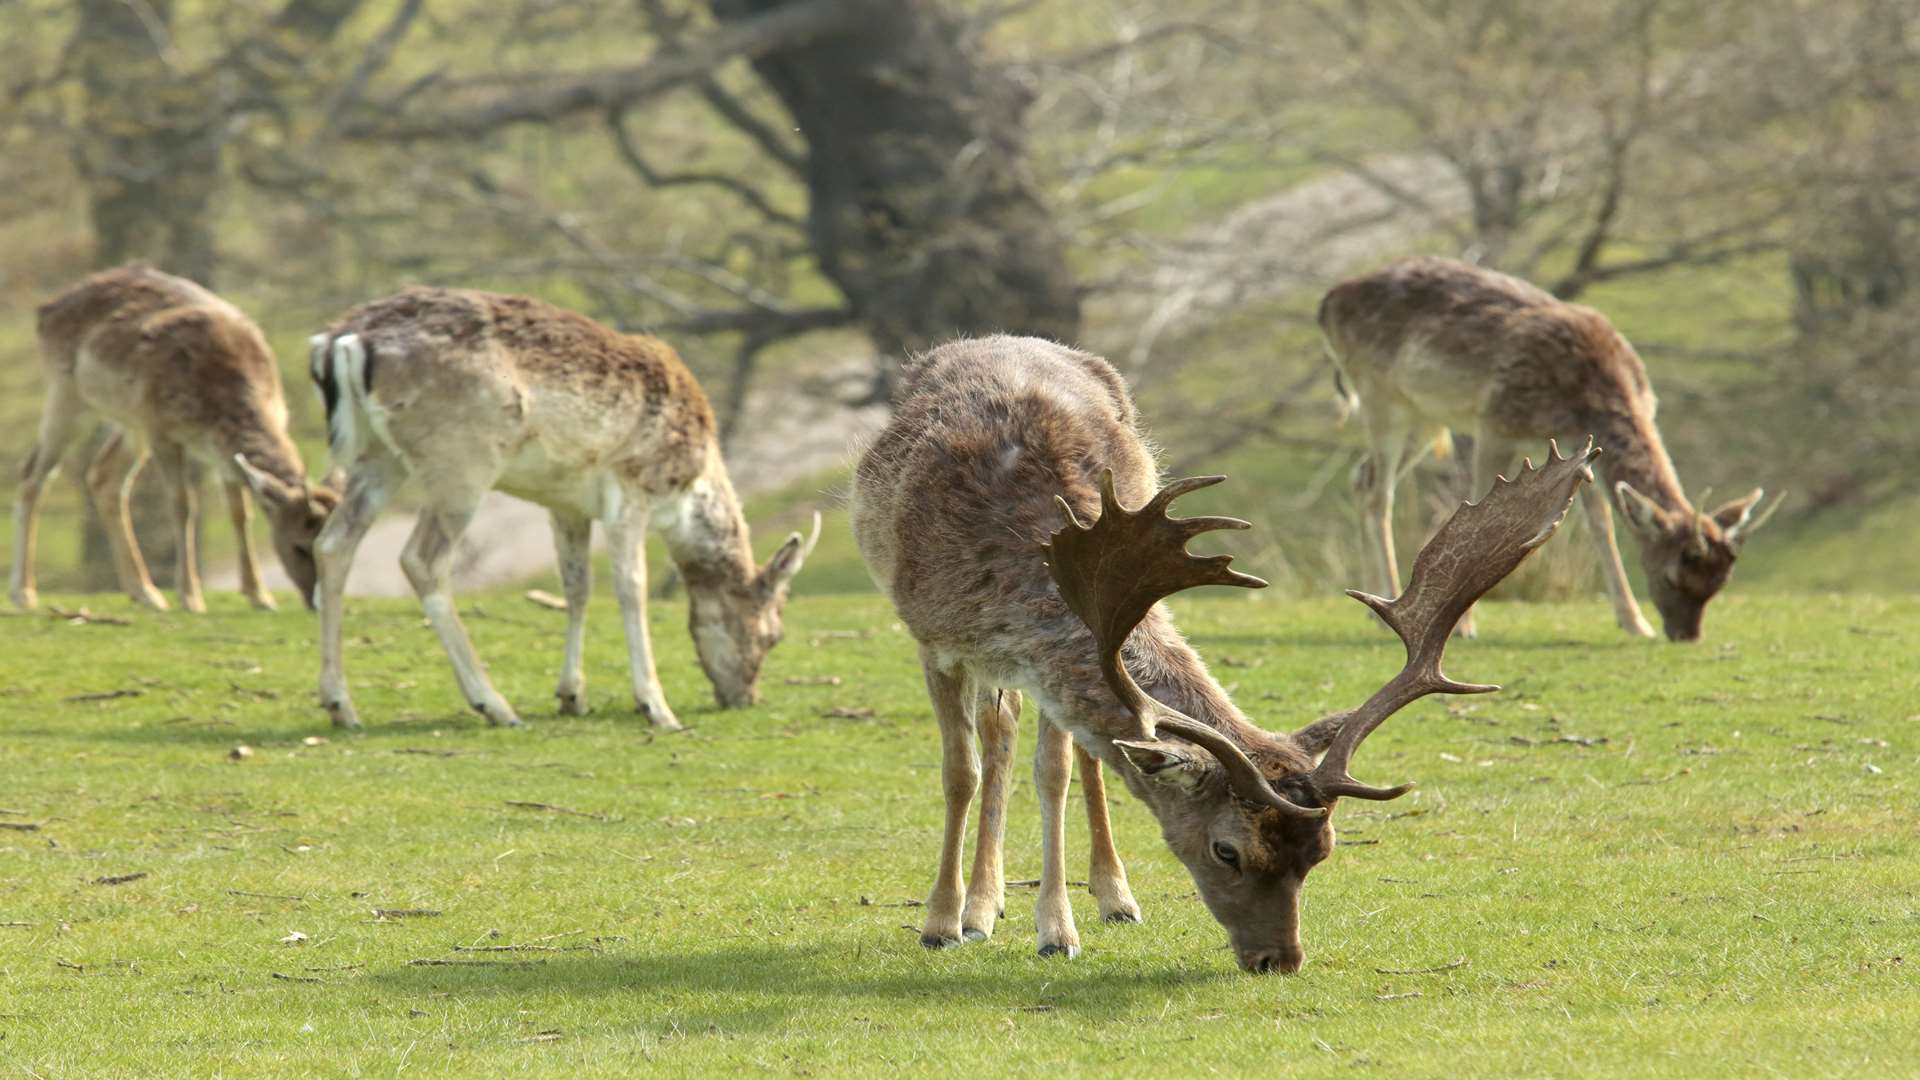 Some of the Knole Park residents